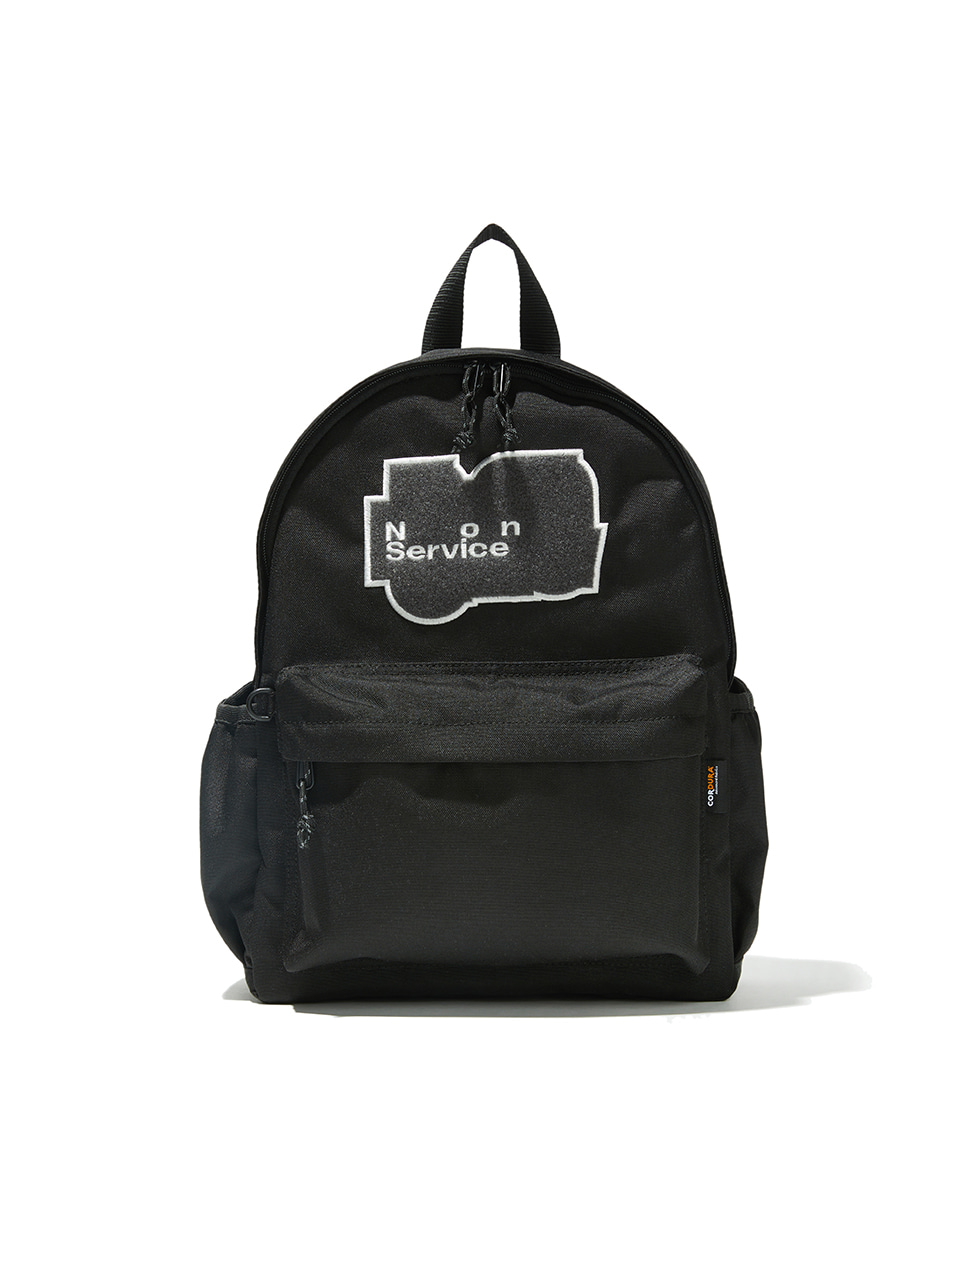 NON CLASSIC BACKPACK BLACK